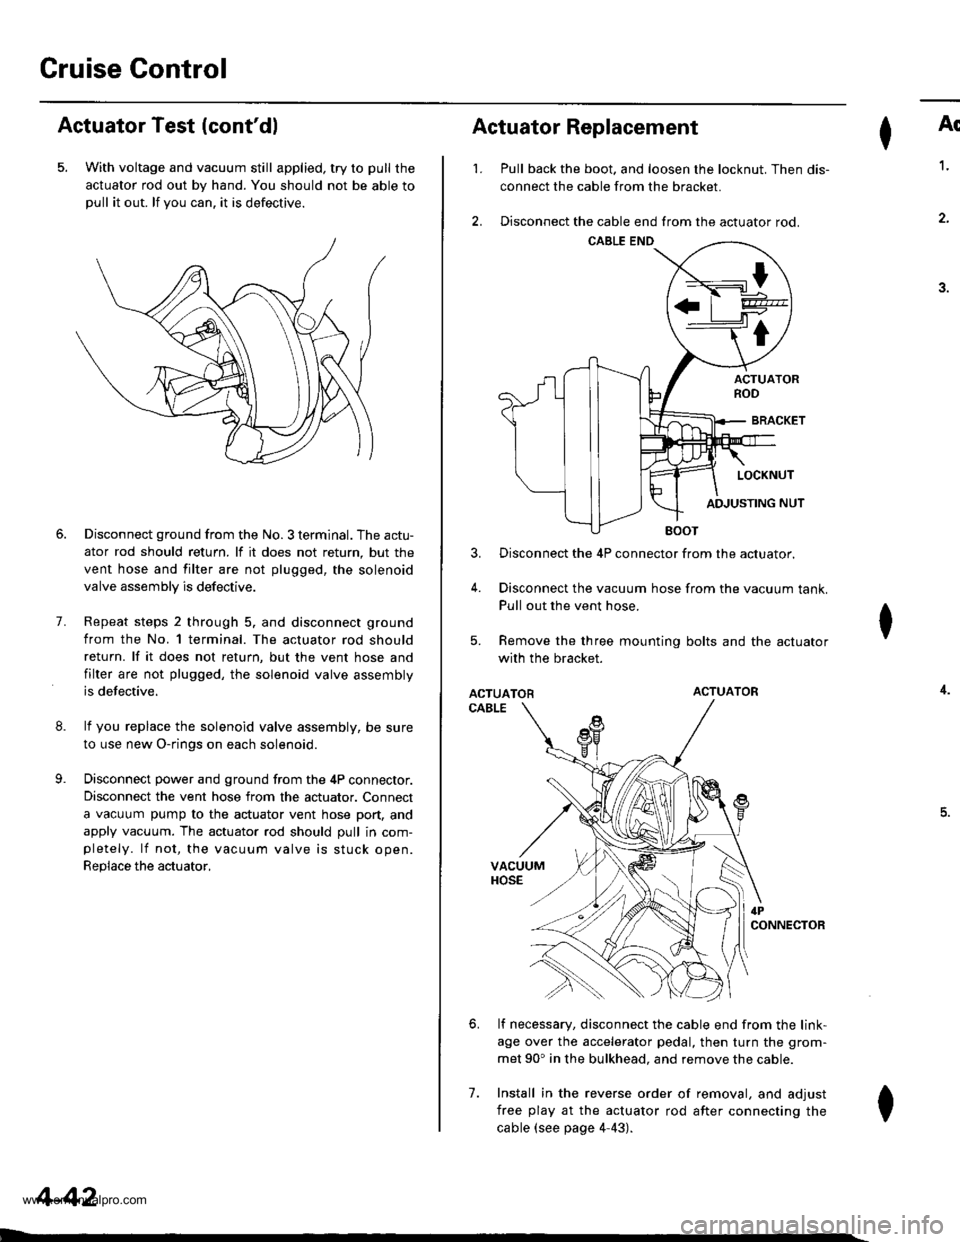 HONDA CR-V 1997 RD1-RD3 / 1.G Workshop Manual 
Cruise Gontrol
Actuator Test (contdl
5. With voltage and vacuum still applied, try to pull the
actuator rod out by hand. You should not be able topull it out. lf you can. it is defectrve.
8.
9.
7.
D